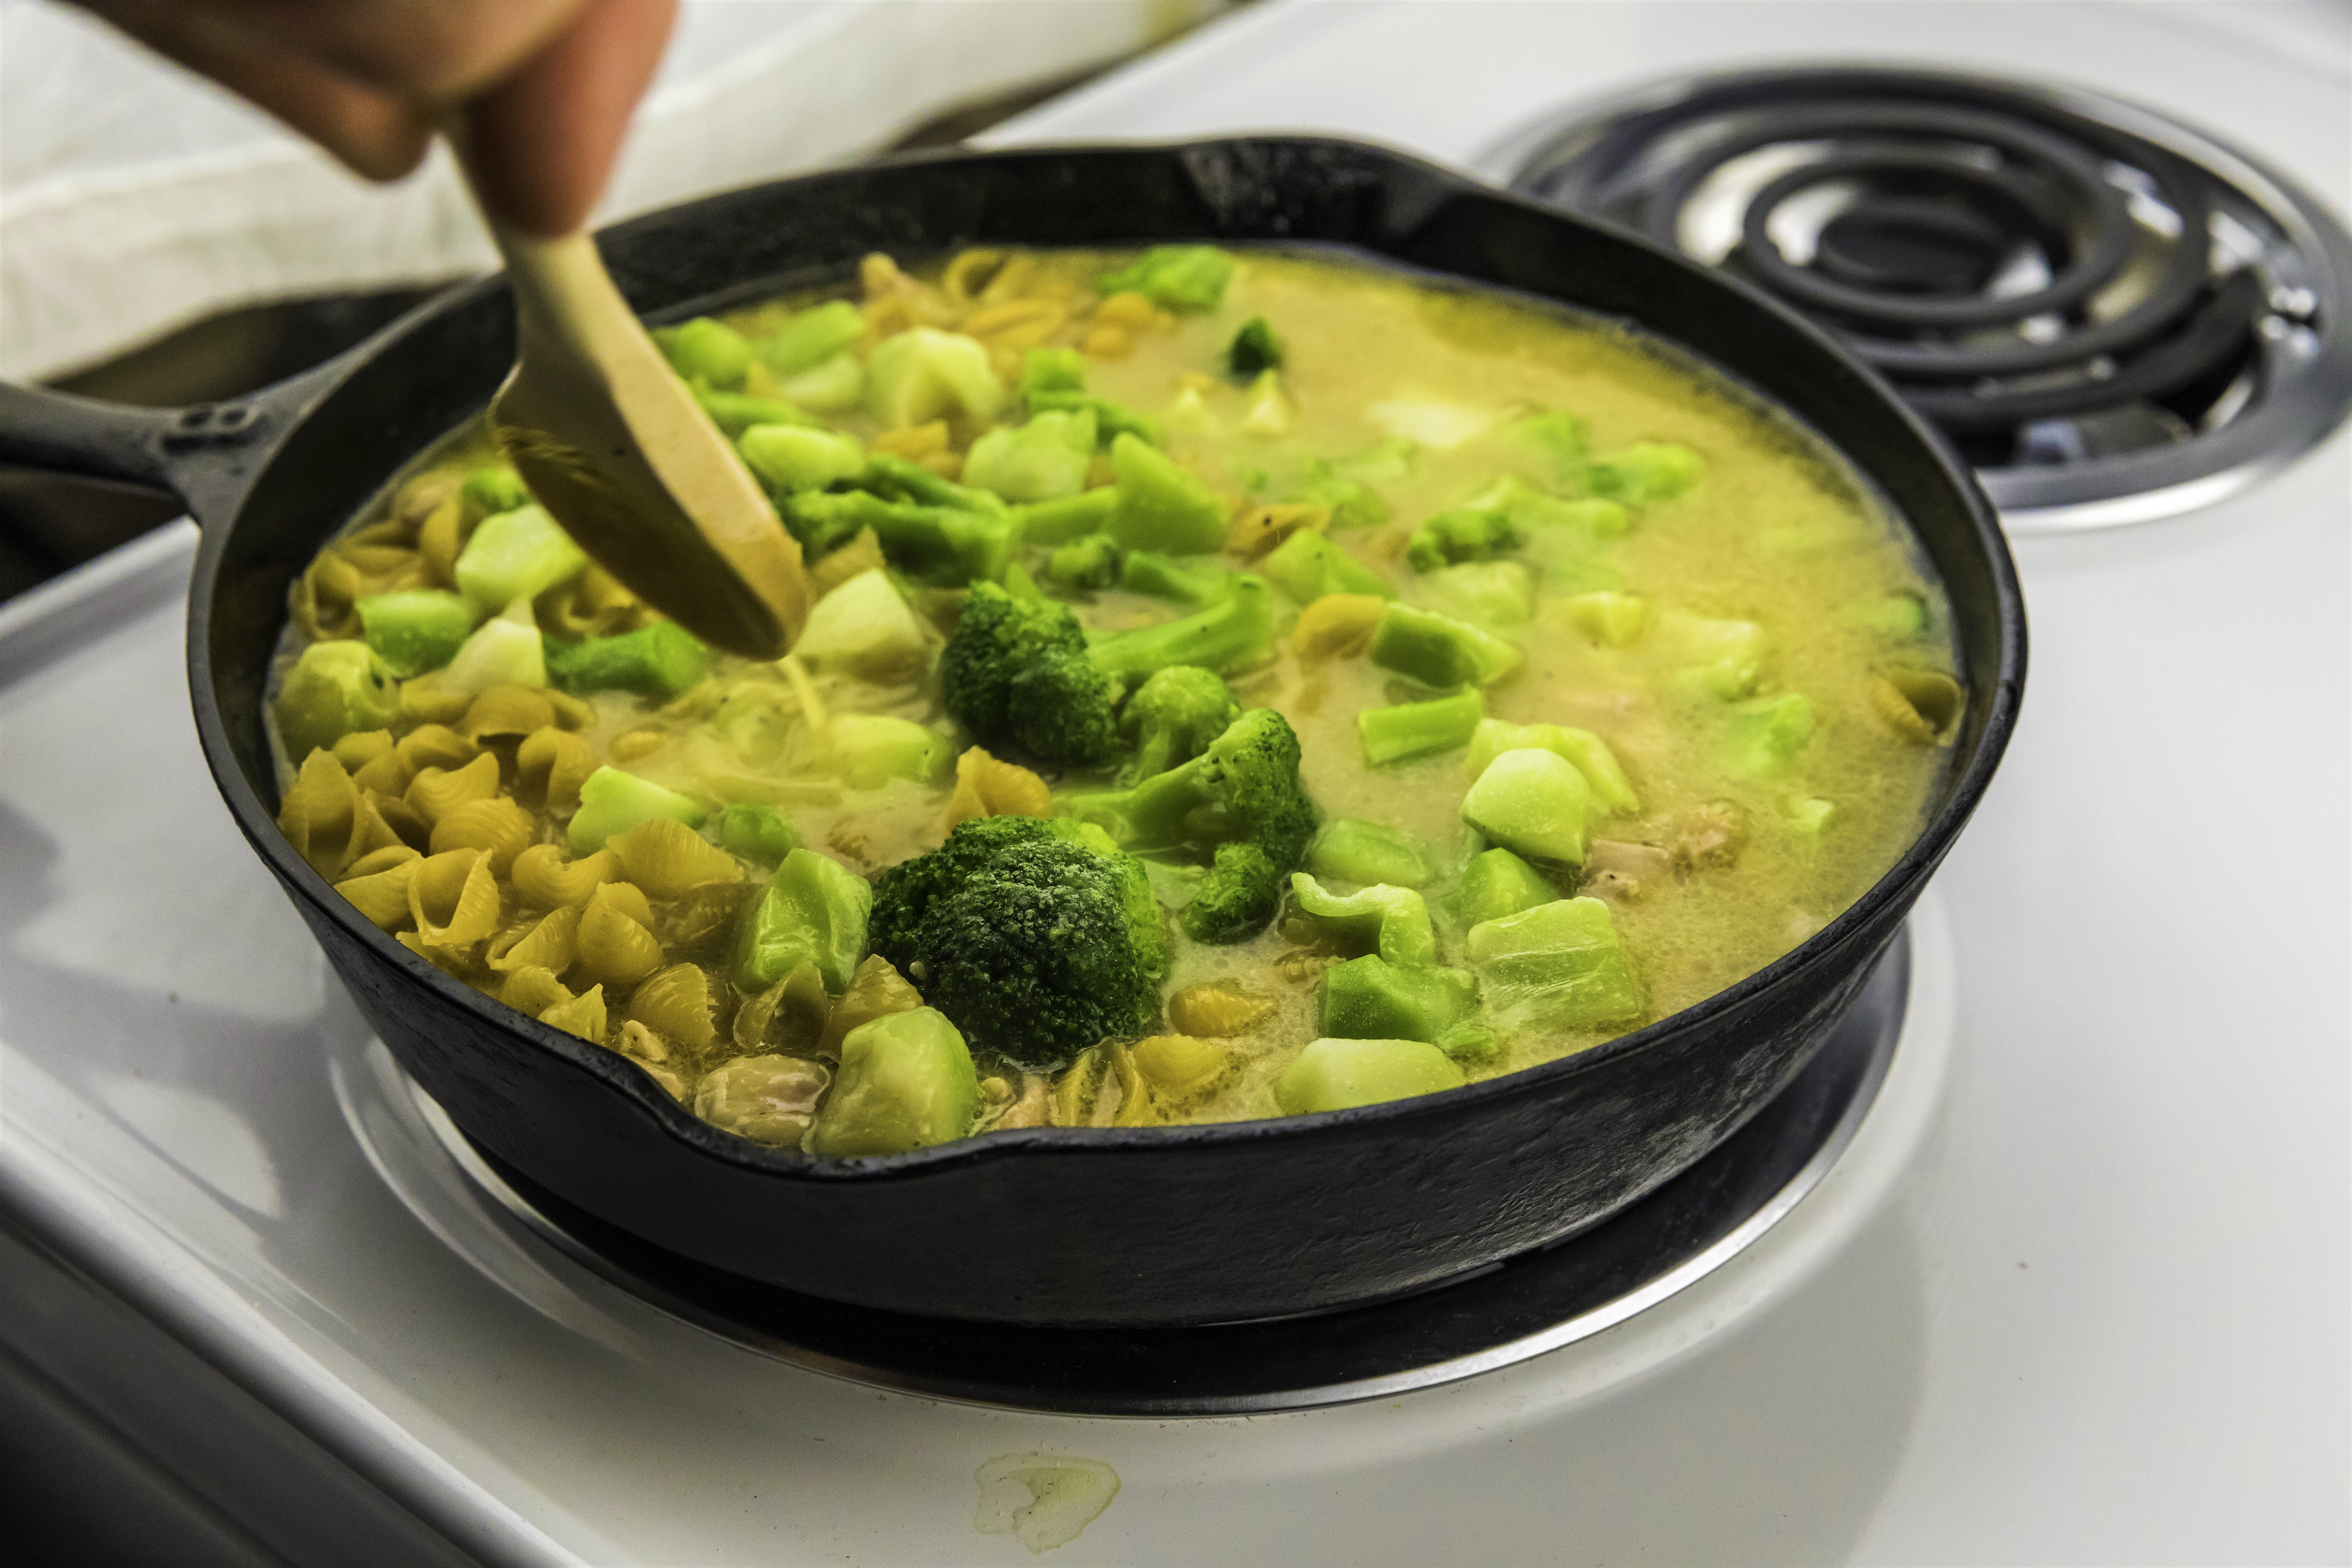 Chicken Broccoli Pasta being prepared in a skillet on the stovetop.